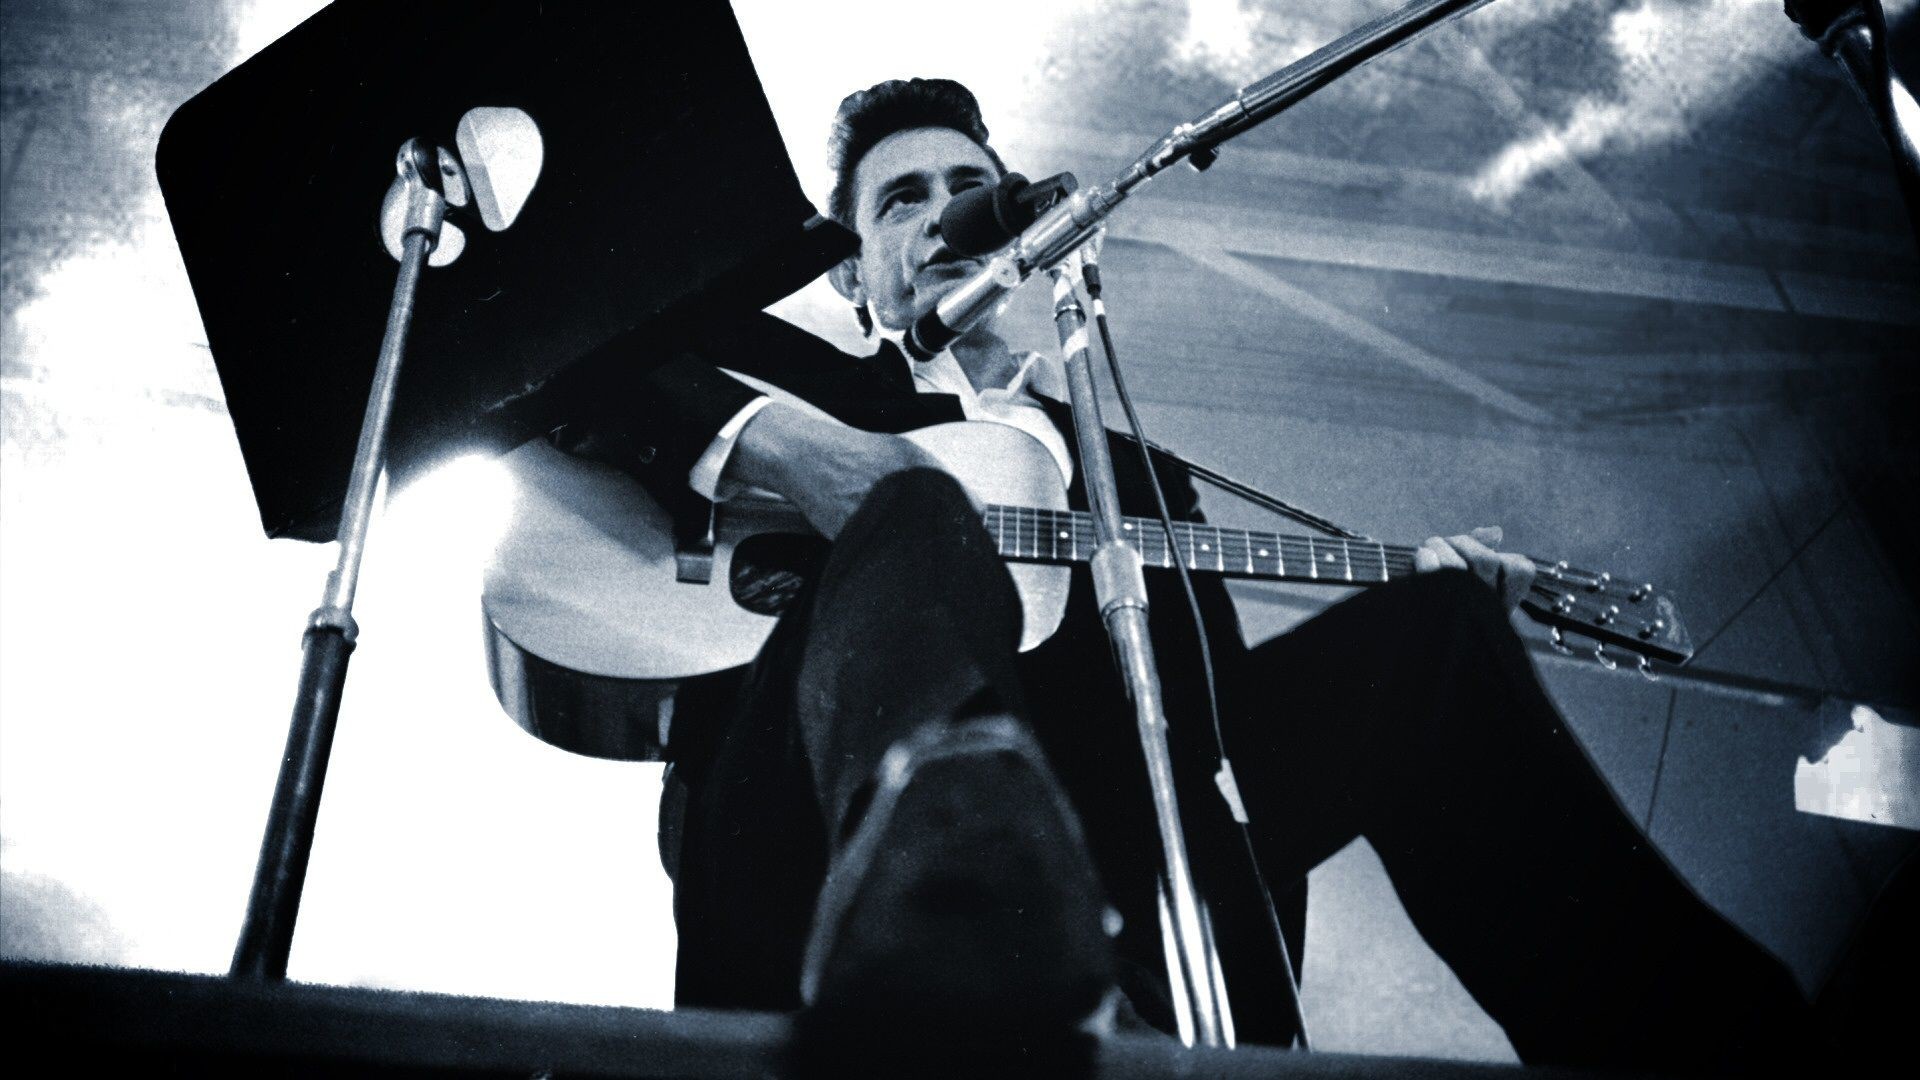 1920x1080 Johnny Cash Wallpapers High Resolution and Quality Download